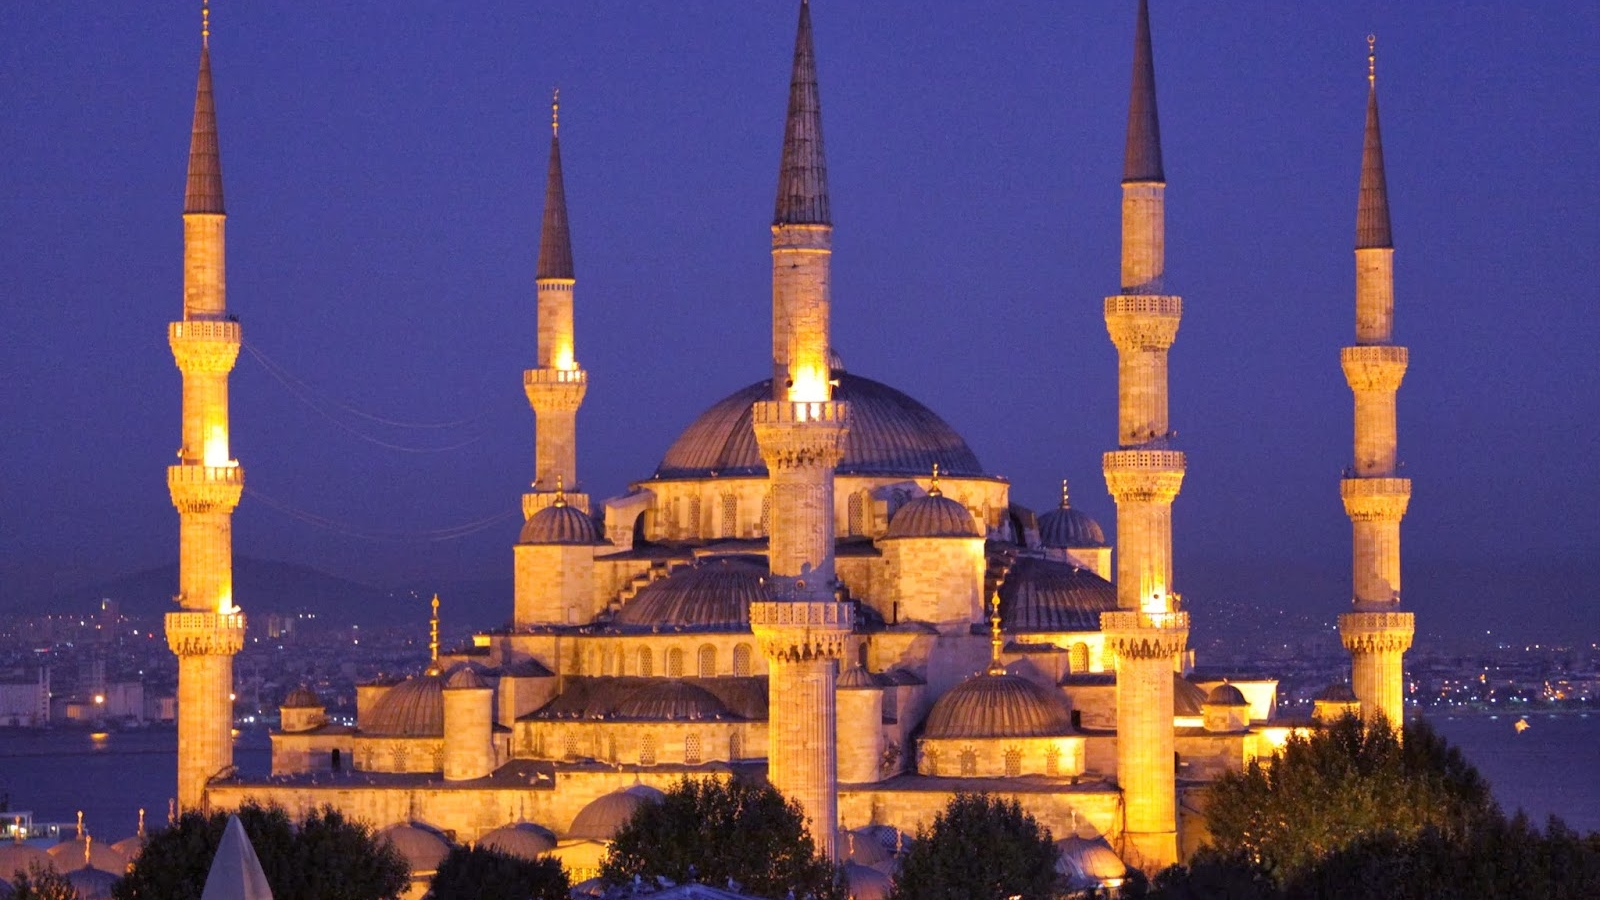 View of Blue Mosque of Istanbul with its 6 minarets,